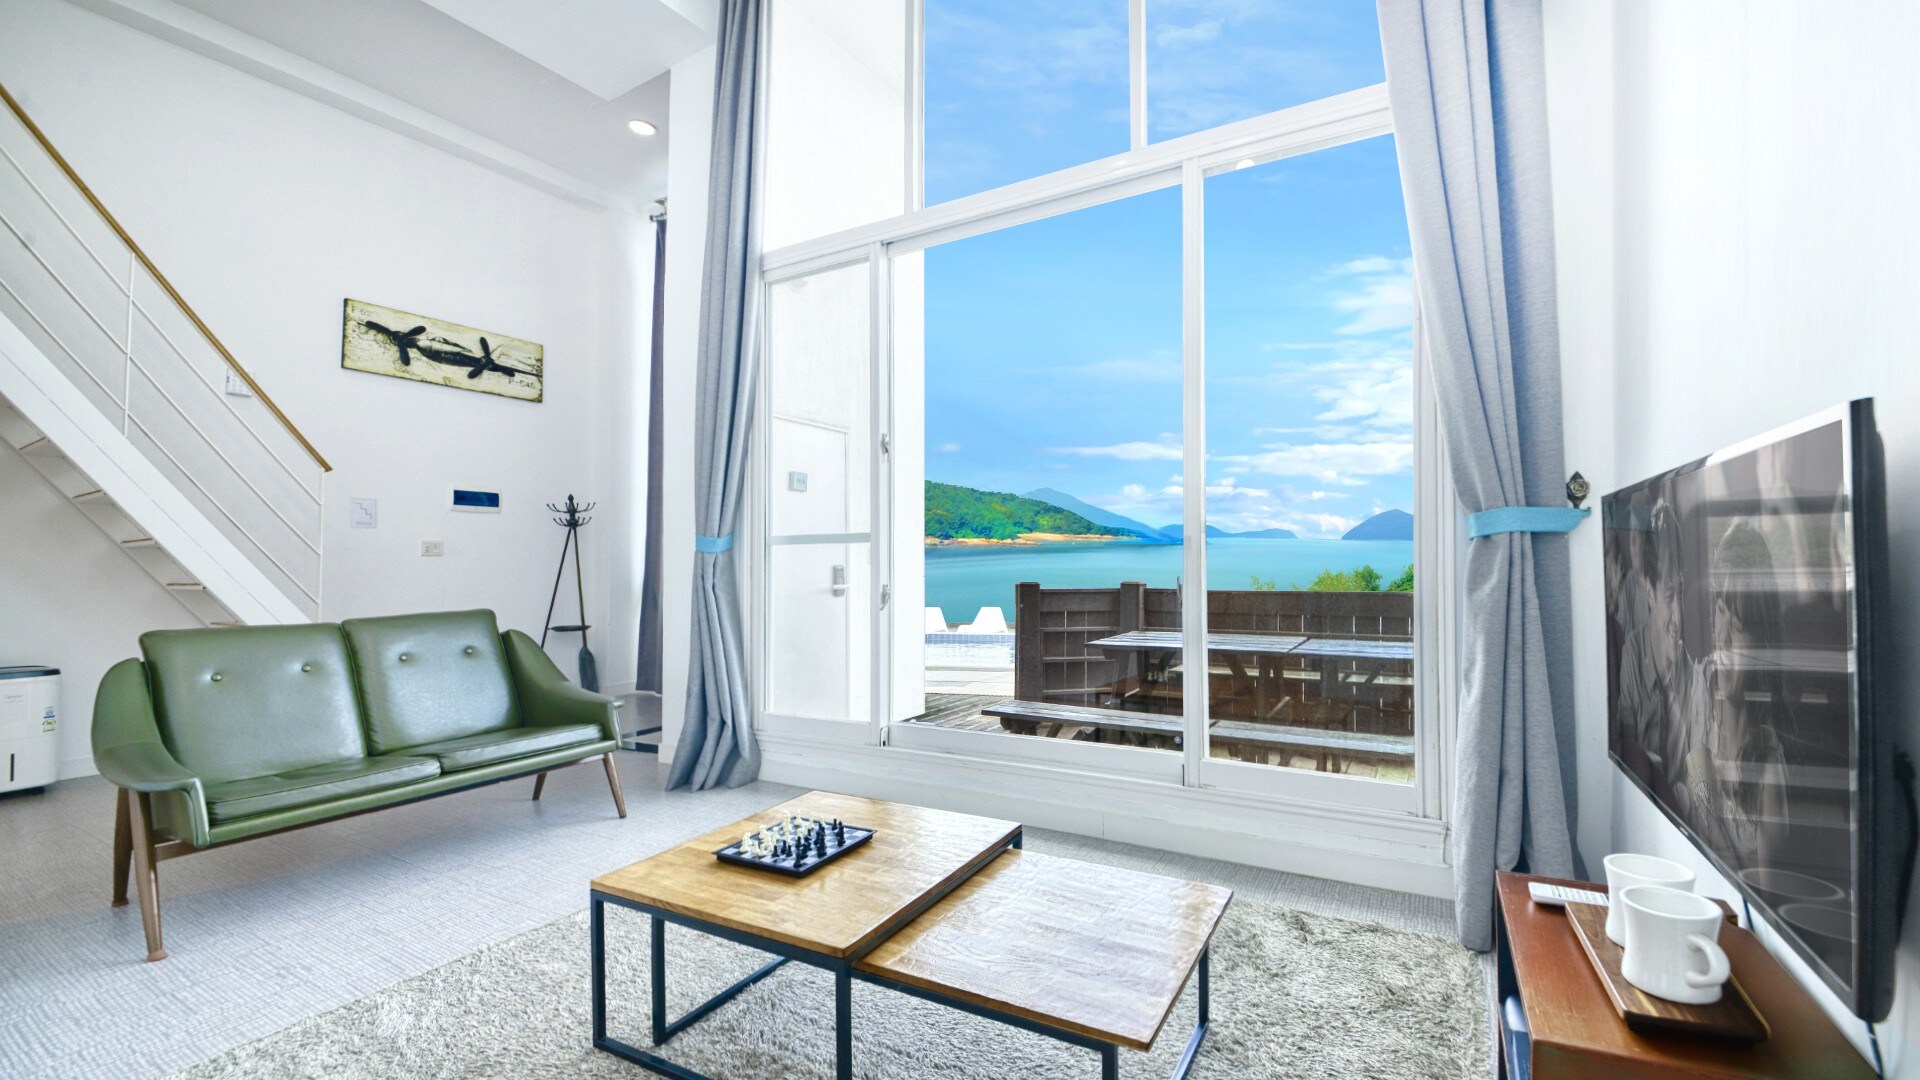 Property Image 1 - Lovely Yeosu ocean view duplex home - Family 2